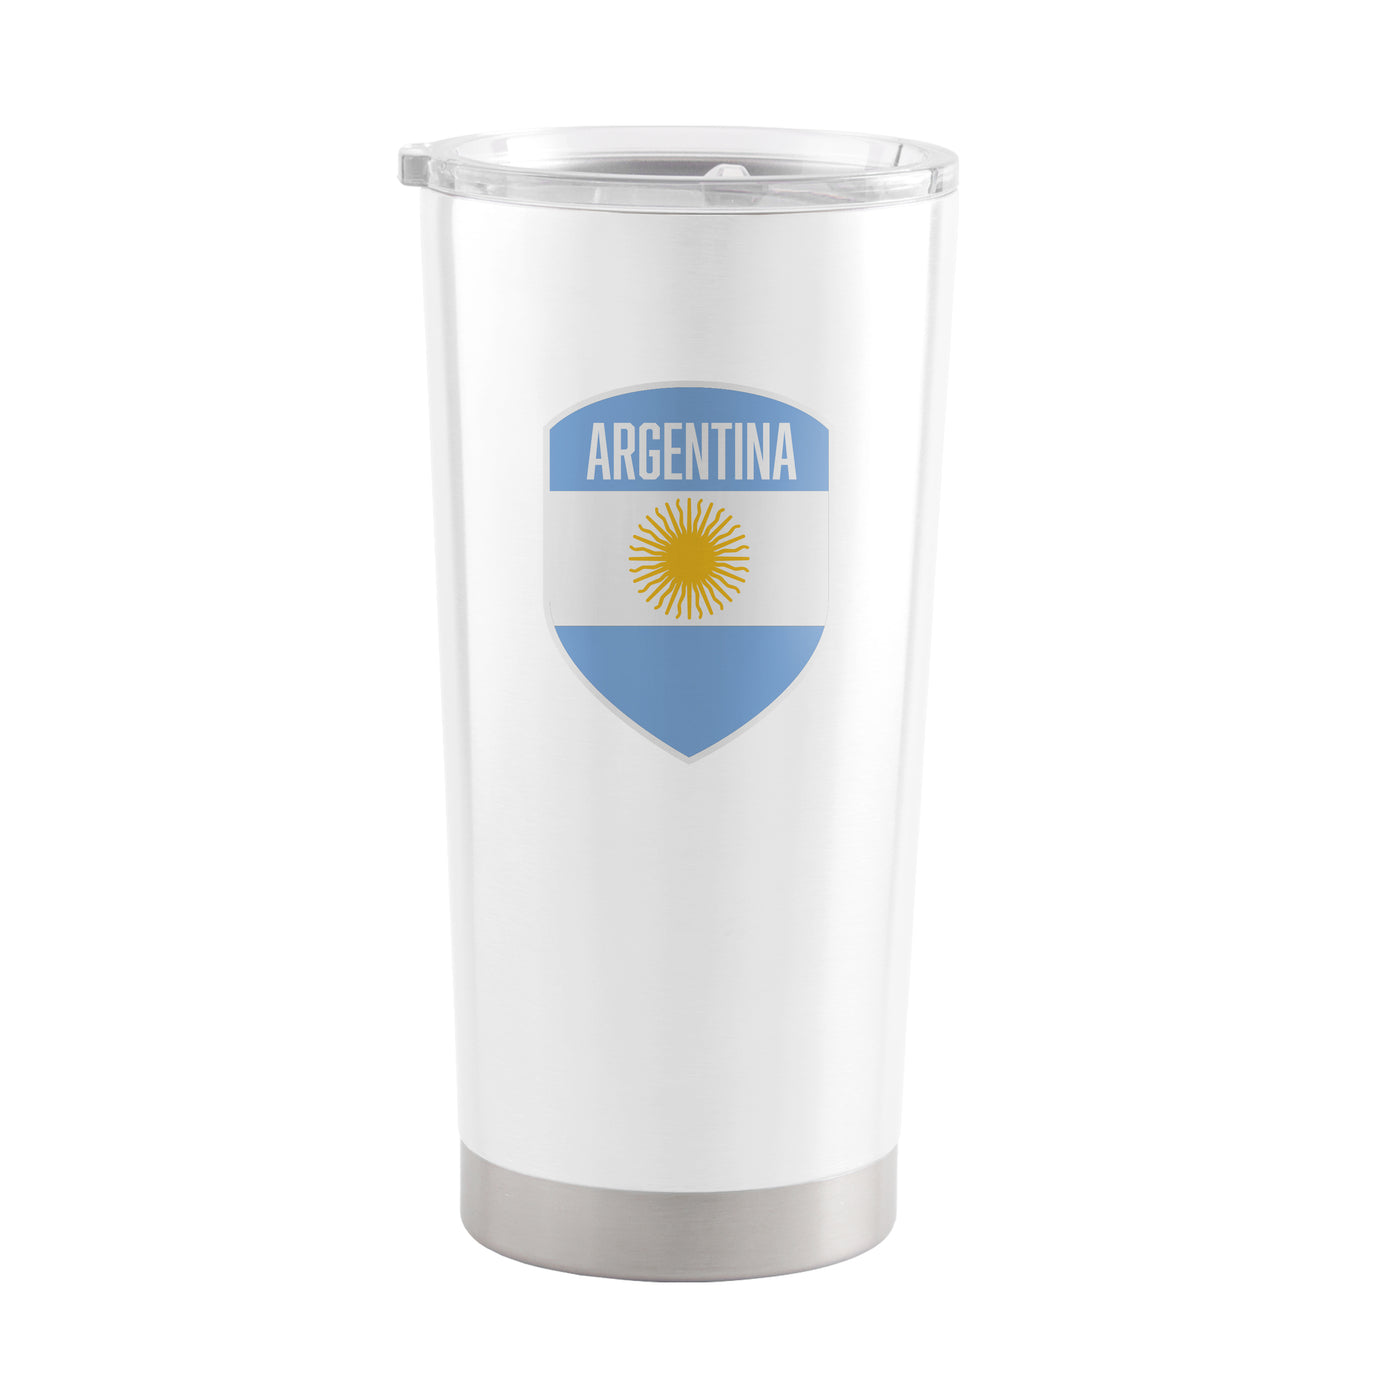 Argentina 20oz Gameday Stainless Steel Tumbler